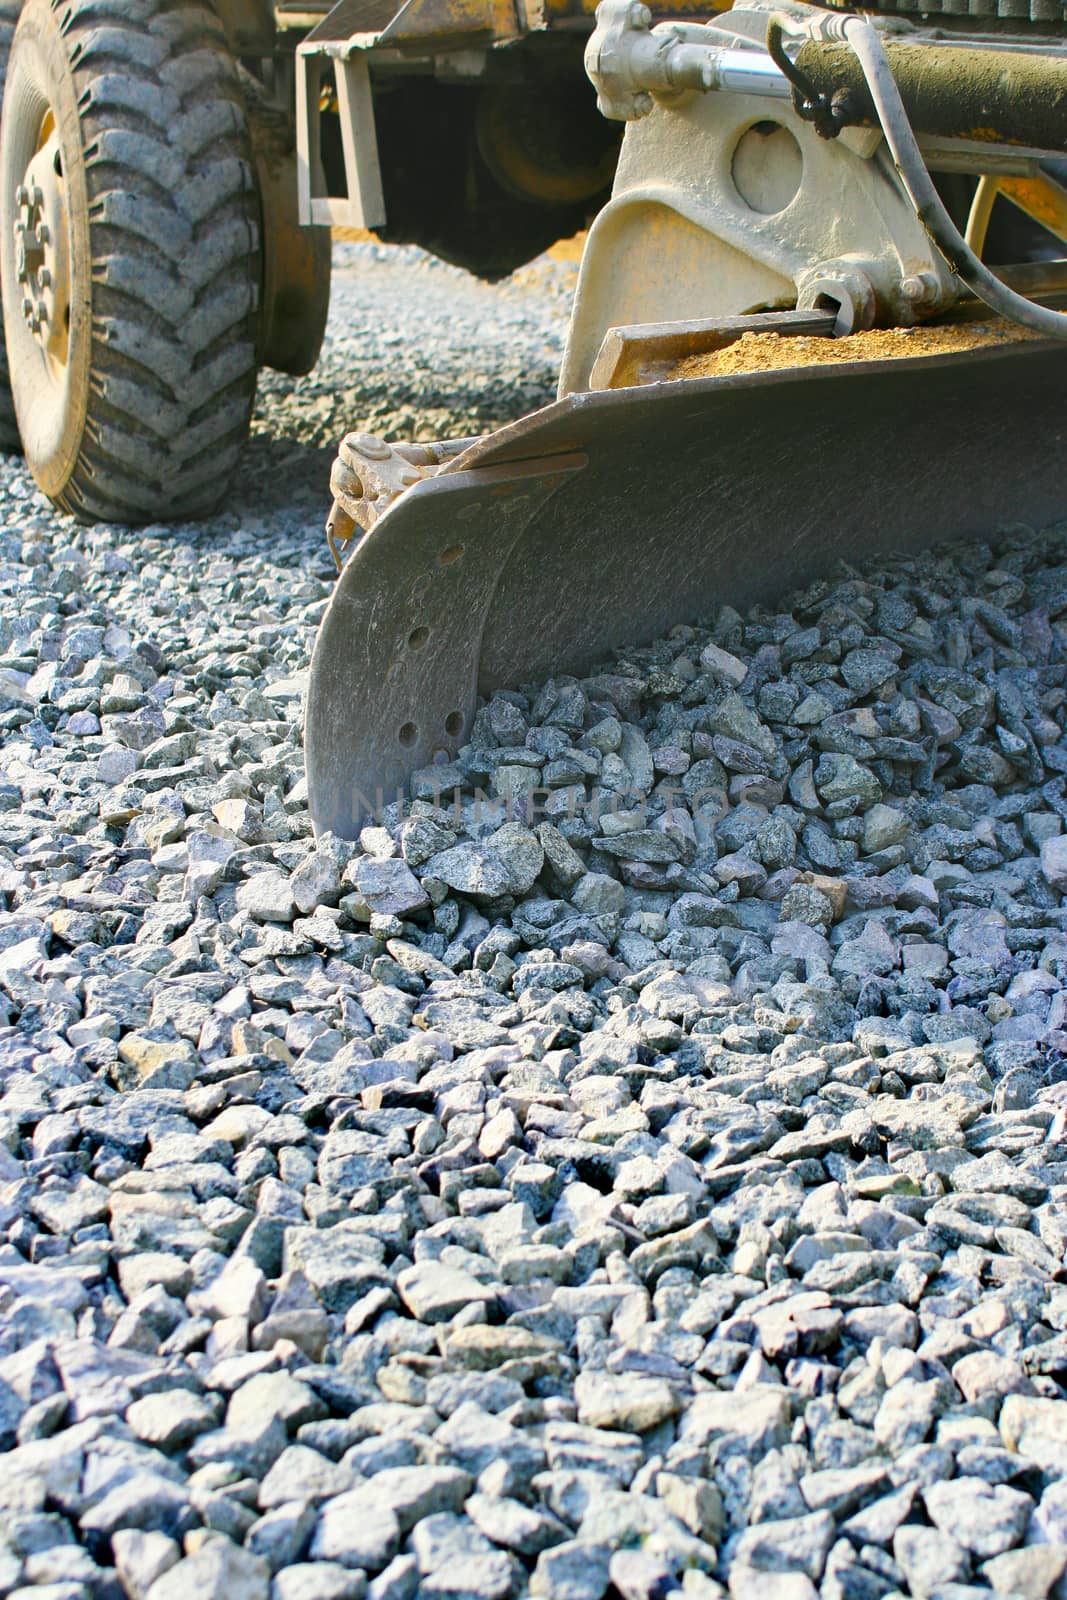  grader levels rubble on  basis of  road cloth